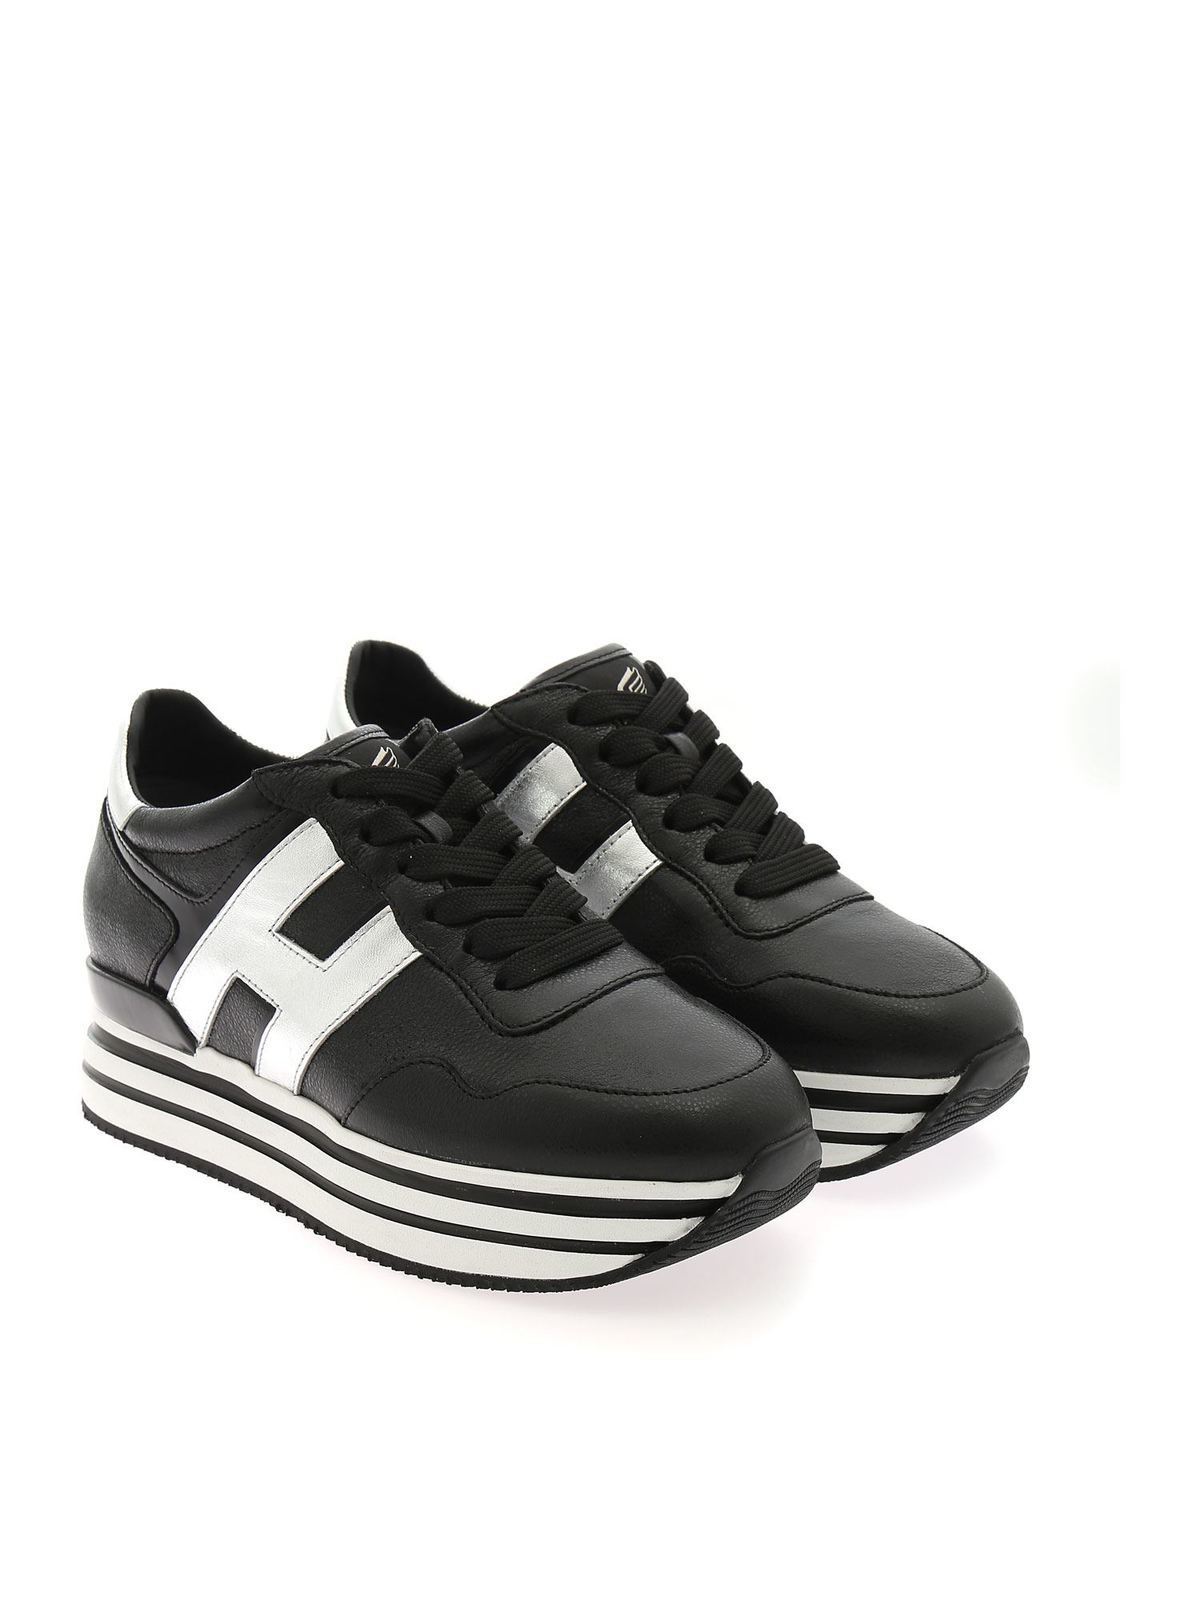 Trainers Hogan - Midi H222 sneakers in black and silver ...